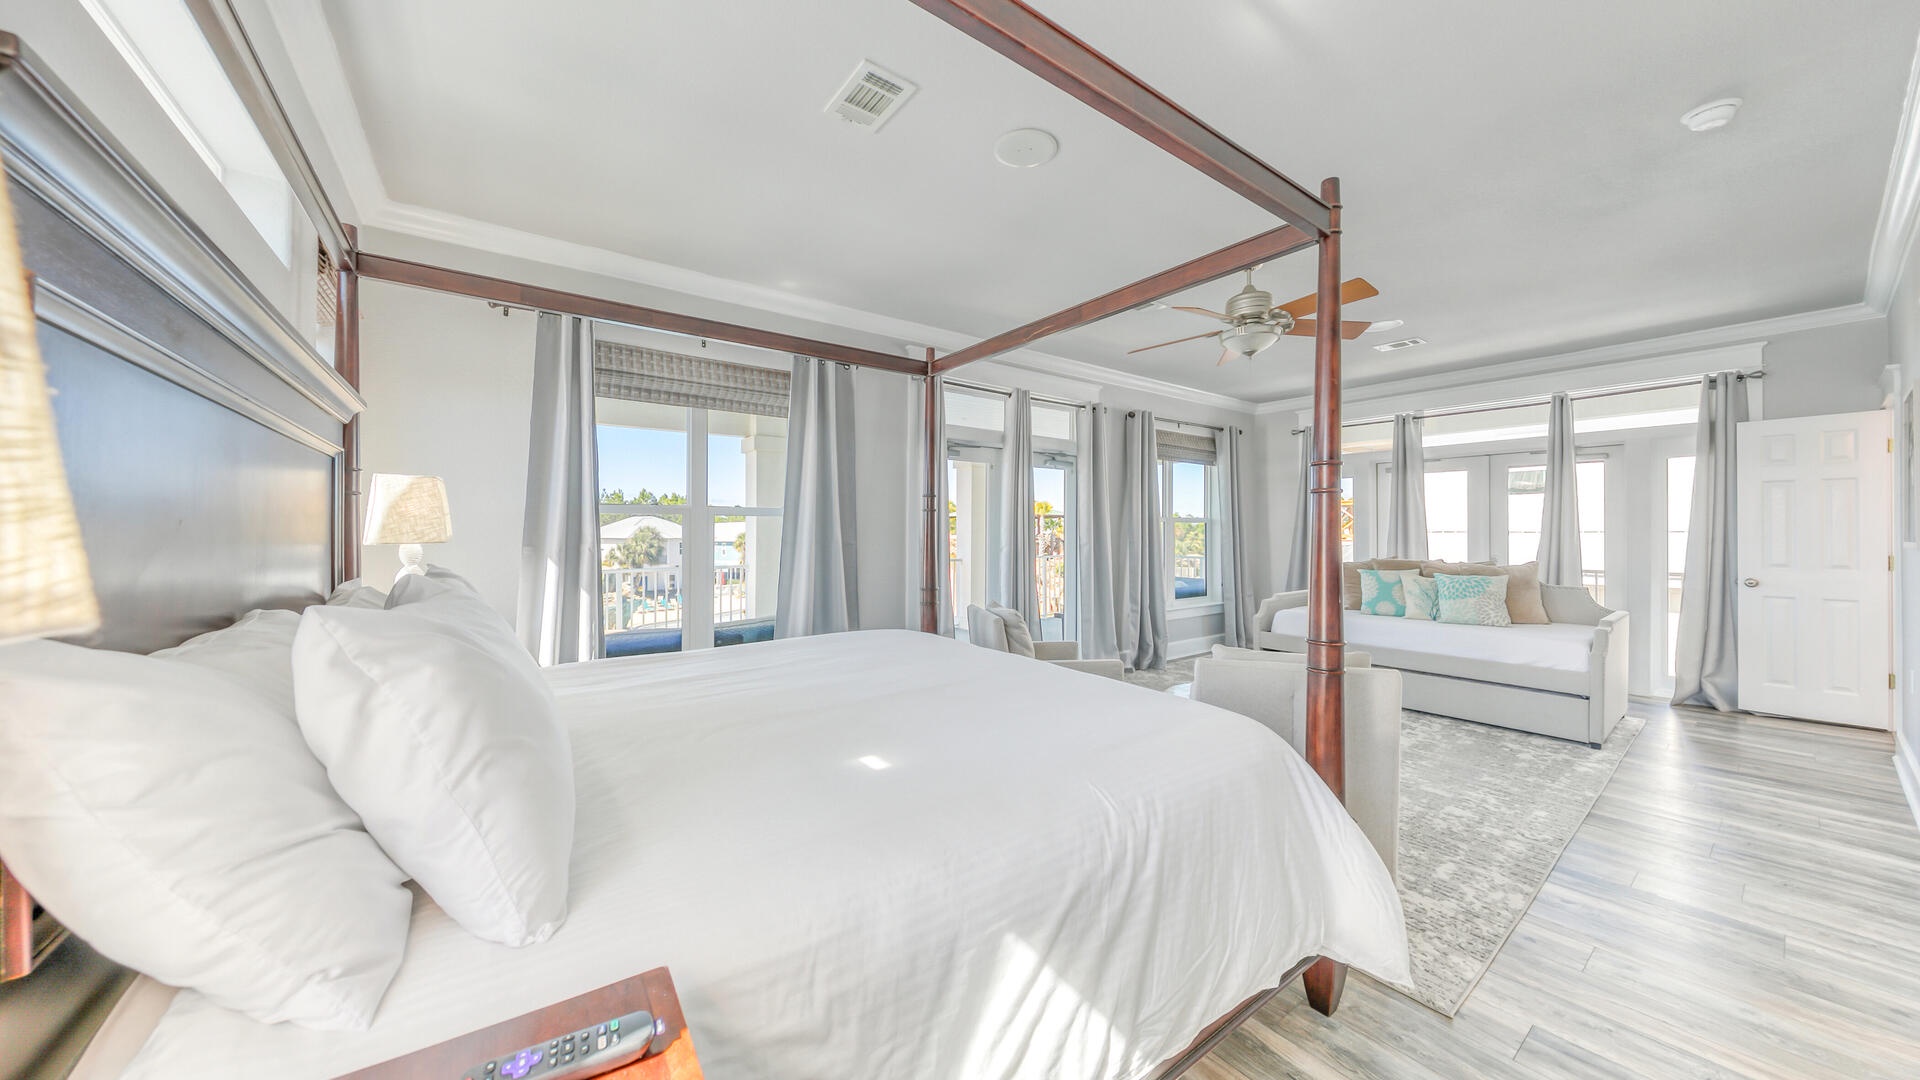 The 3rd floor master suite includes a king size bed and a huge balcony overlooking the pool!